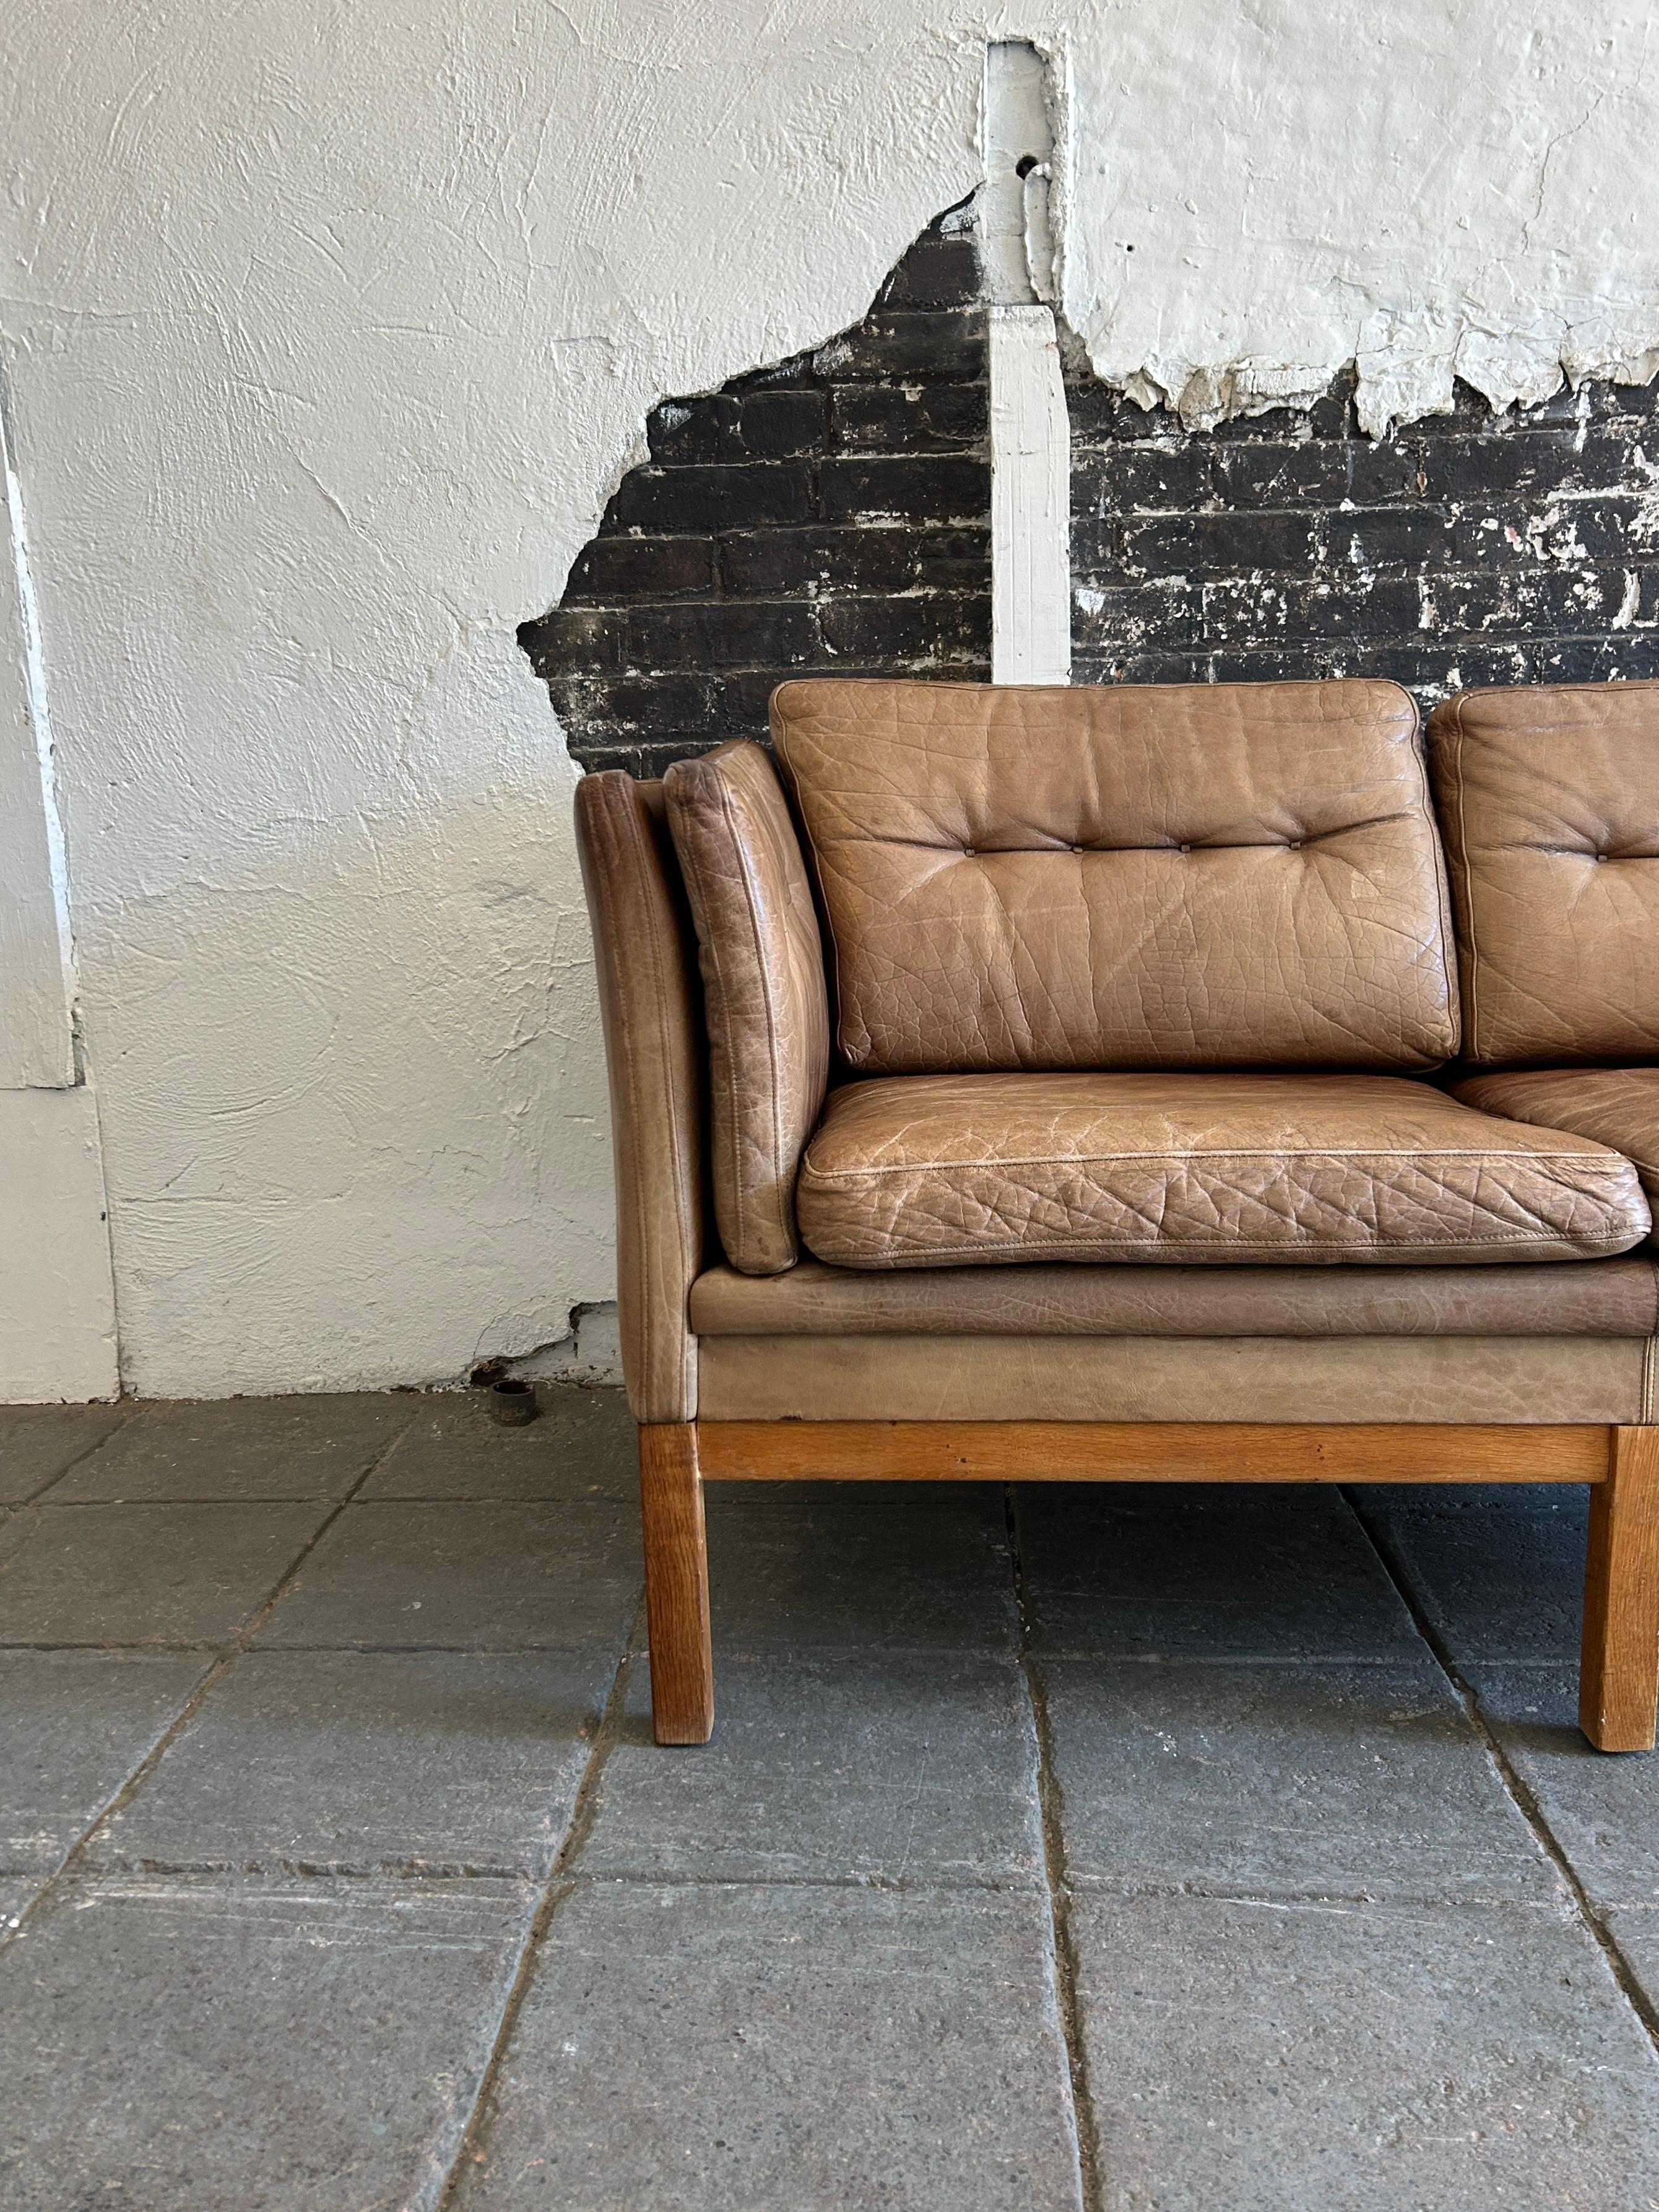 Mid century Danish modern Brown leather 2 seat sofa that sits on an 6 leg solid white oak base. Made by Skippers mobler. Light Brown leather is soft and shows lots of patina fading and signs of use but broken in nicely. Great small Danish Modern